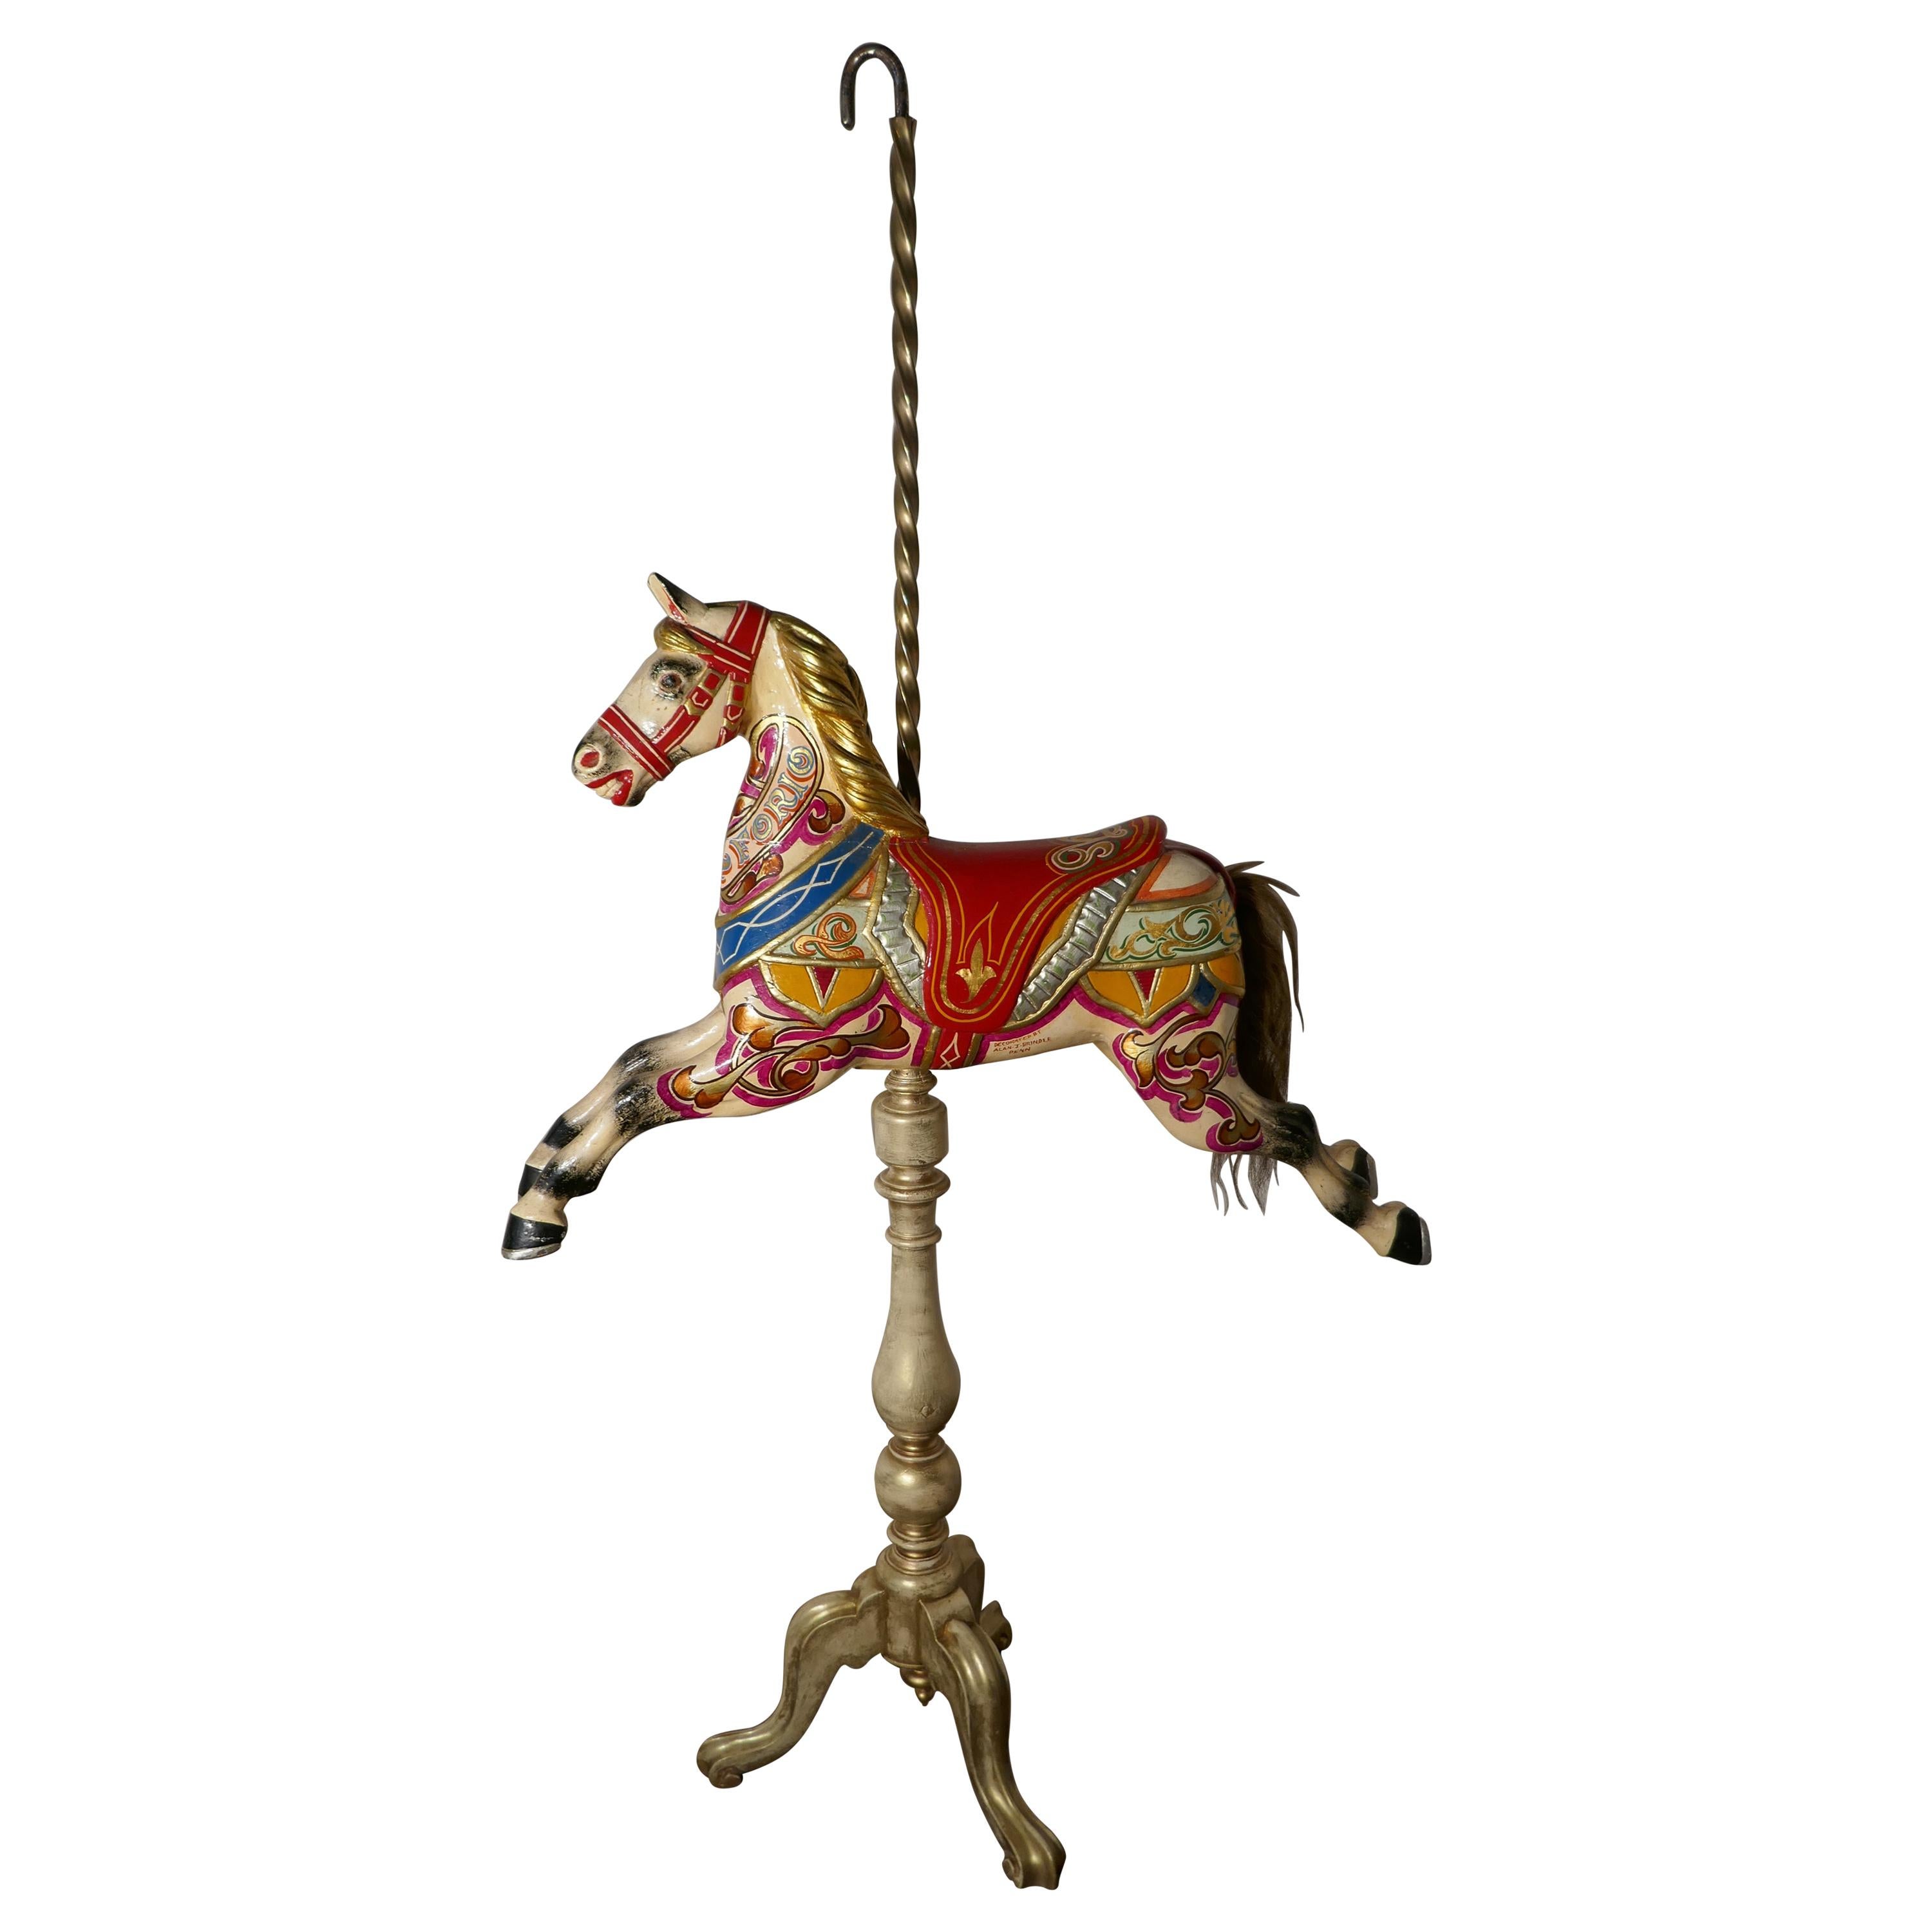 Small 19th Century Painted Wooden Carousel Galloper or Fair Ground Horse